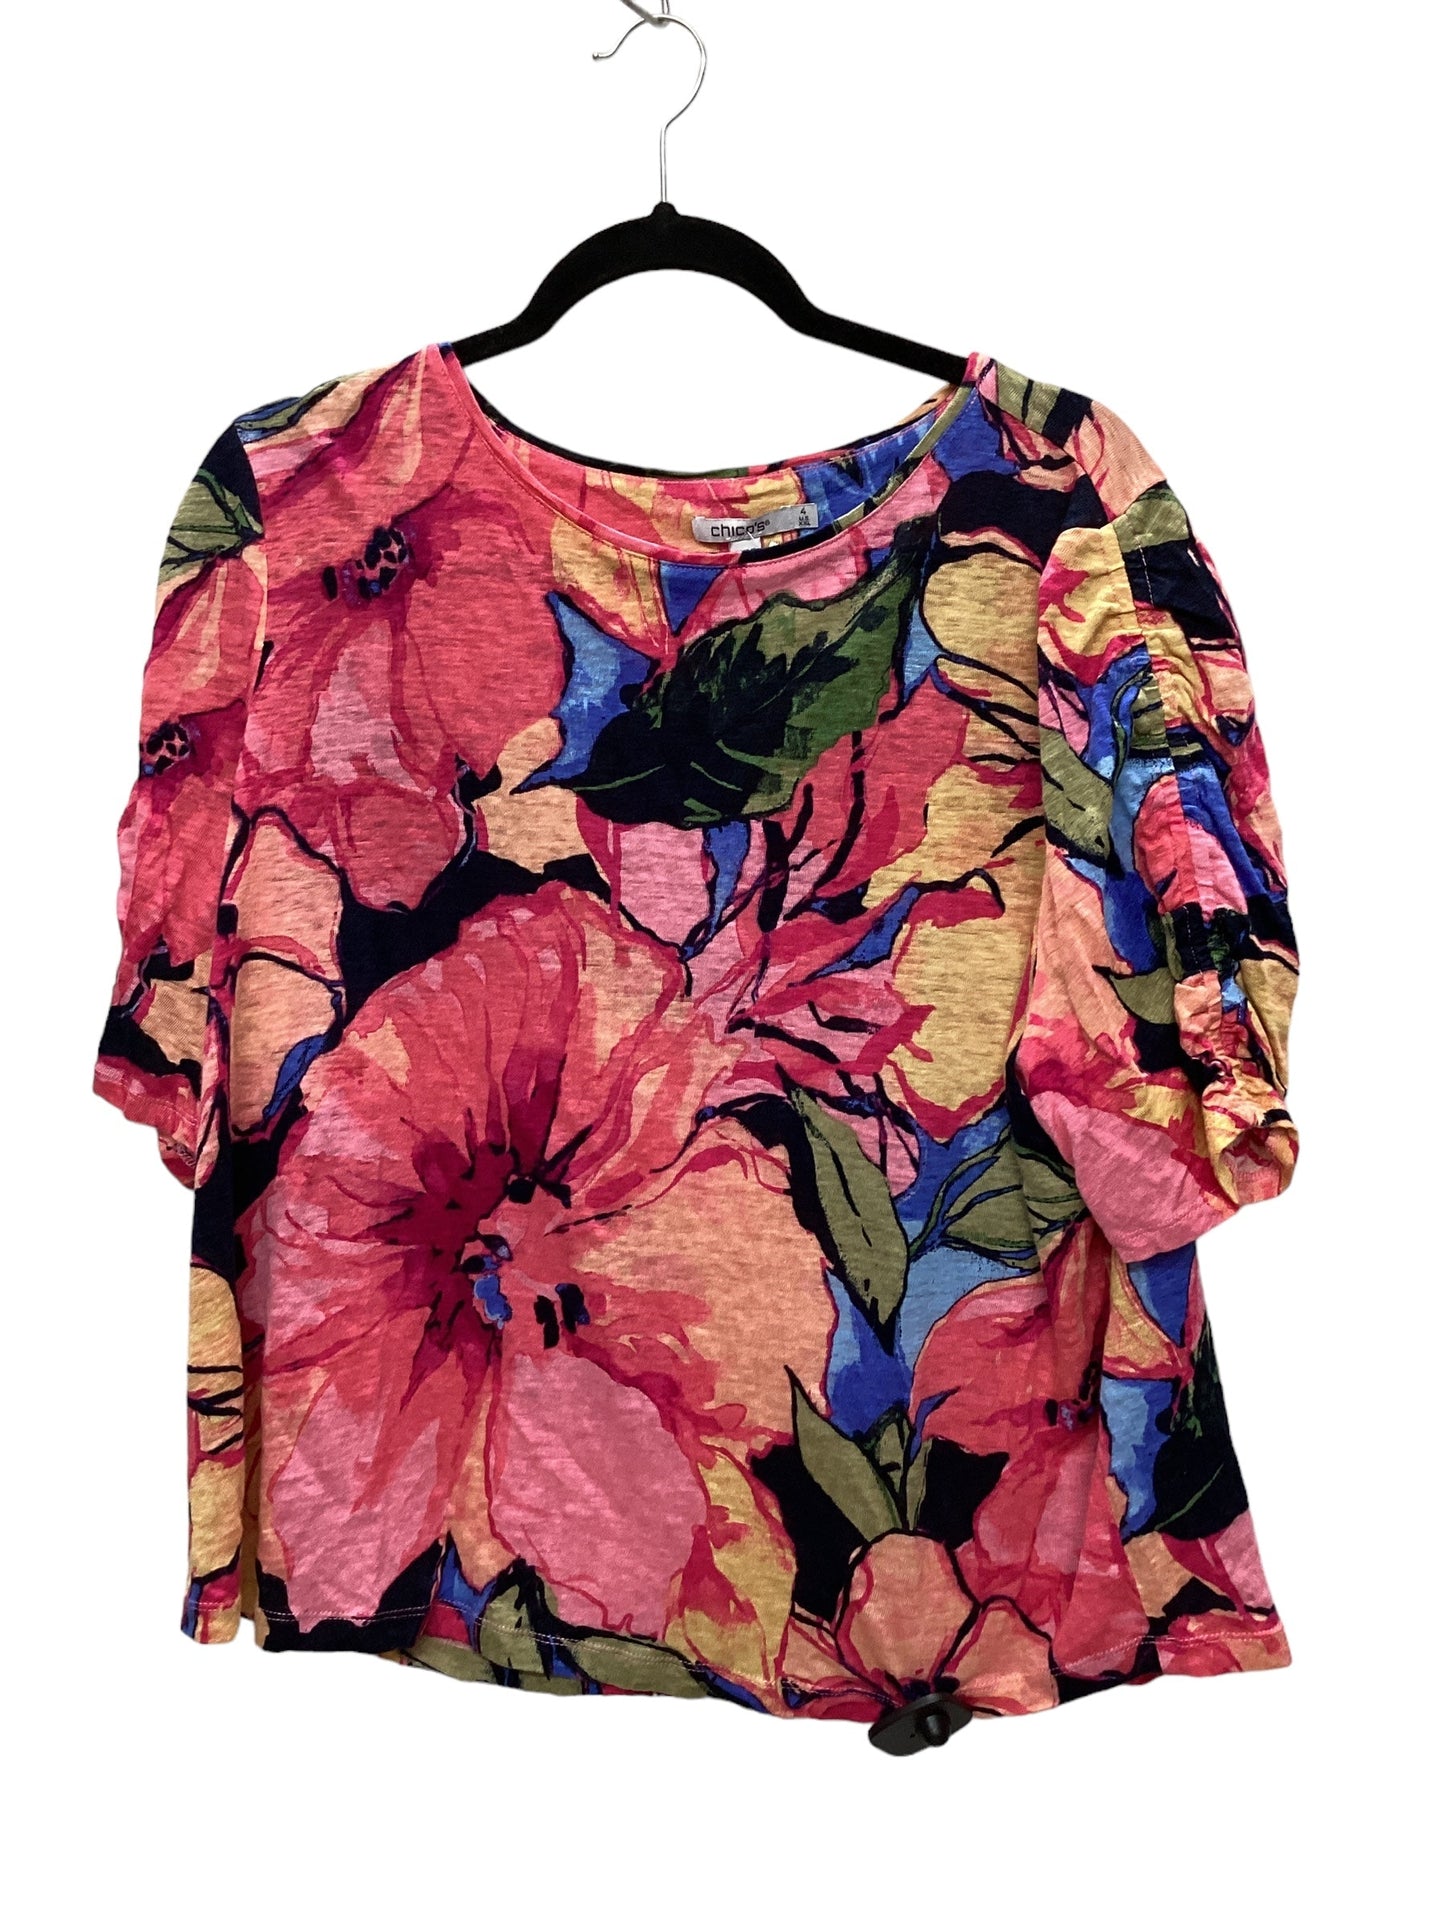 Floral Print Top Short Sleeve Chicos, Size 4